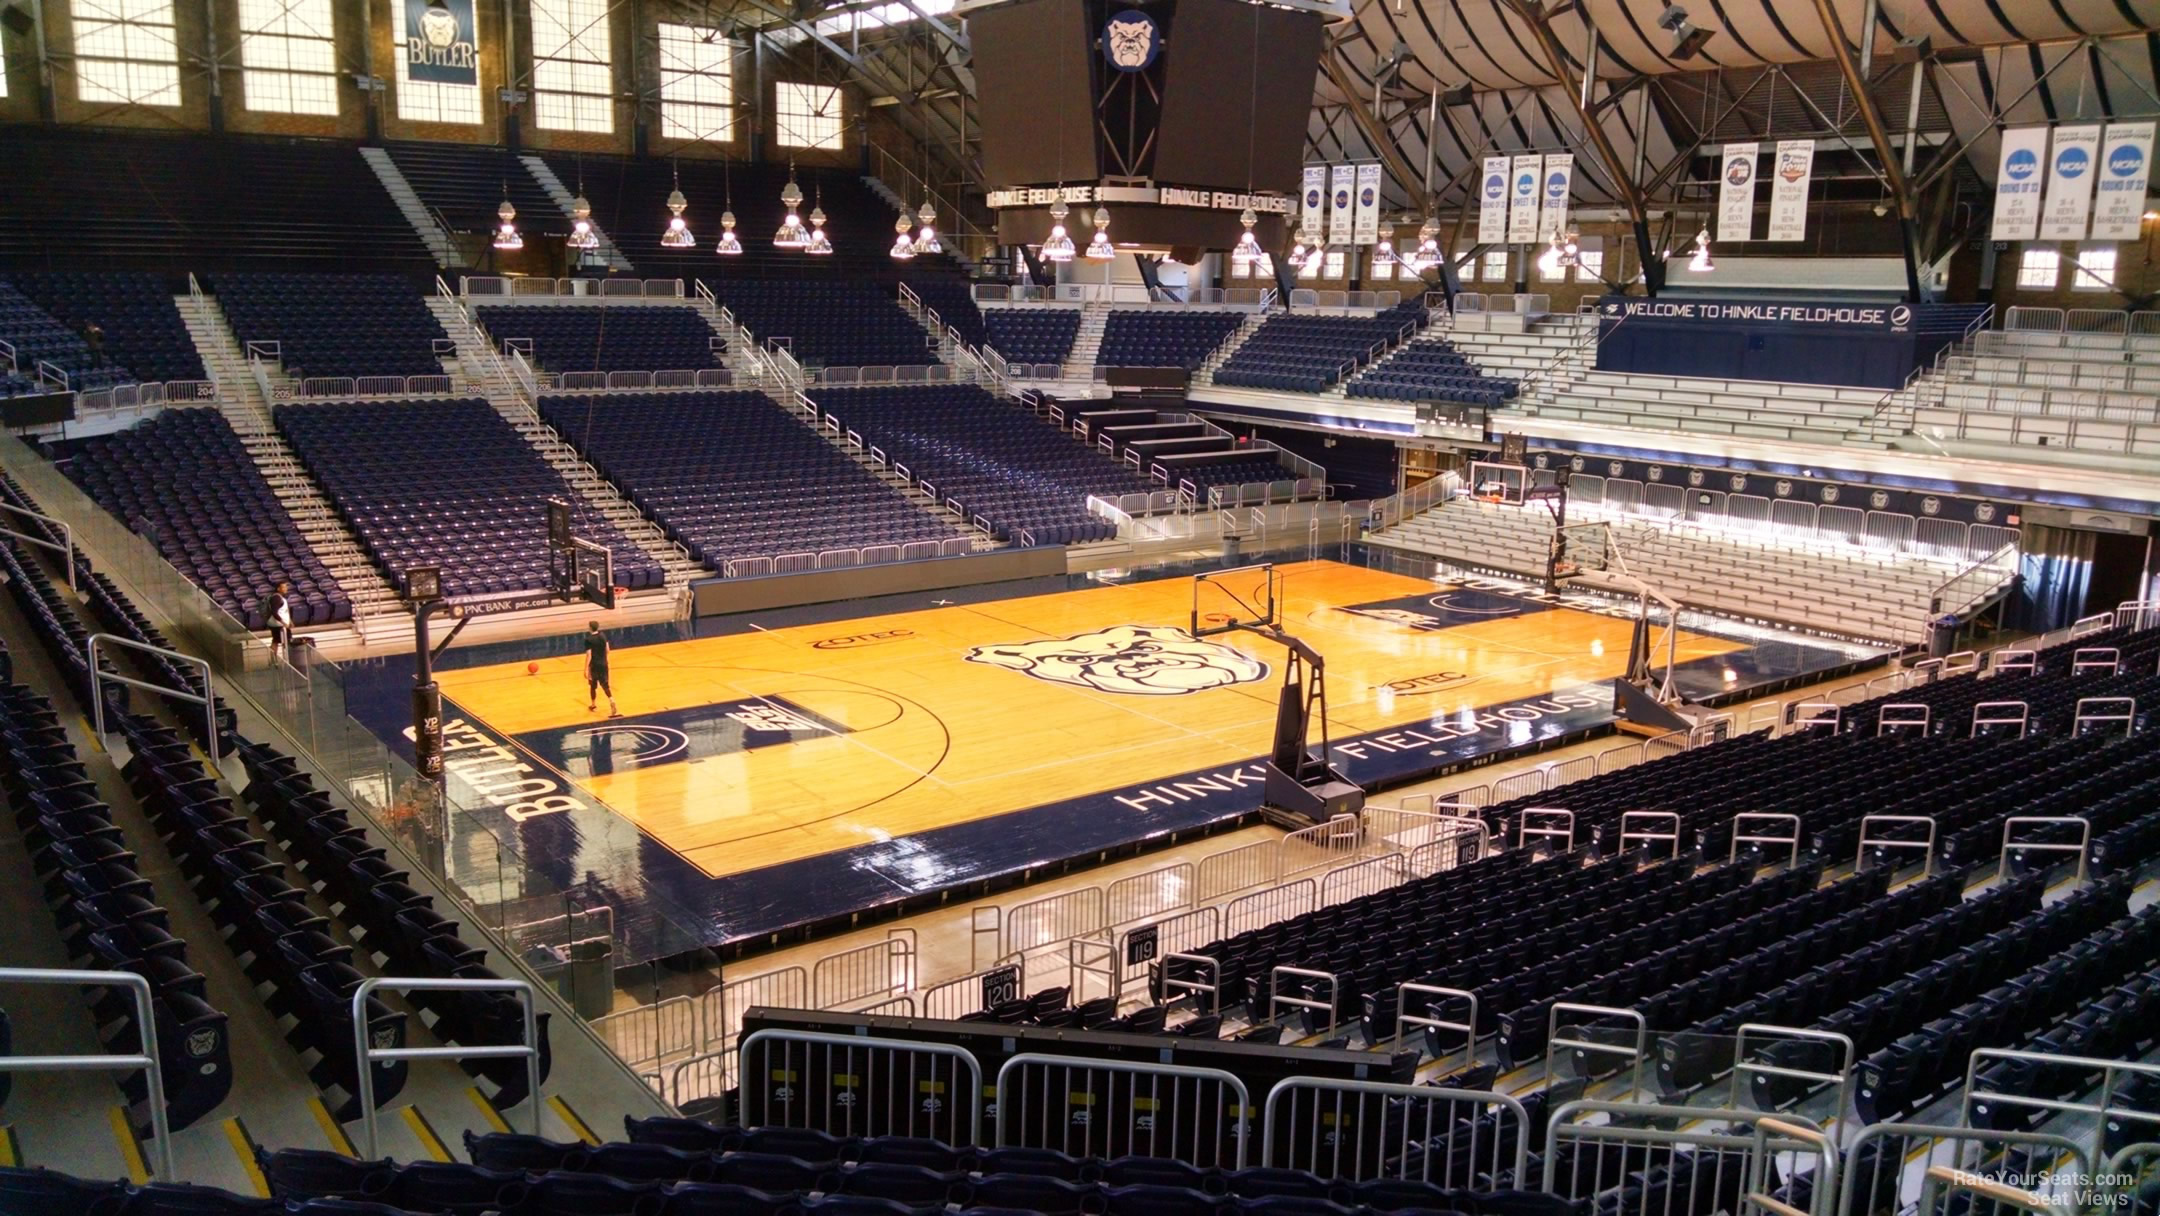 section 221, row 10 seat view  - hinkle fieldhouse